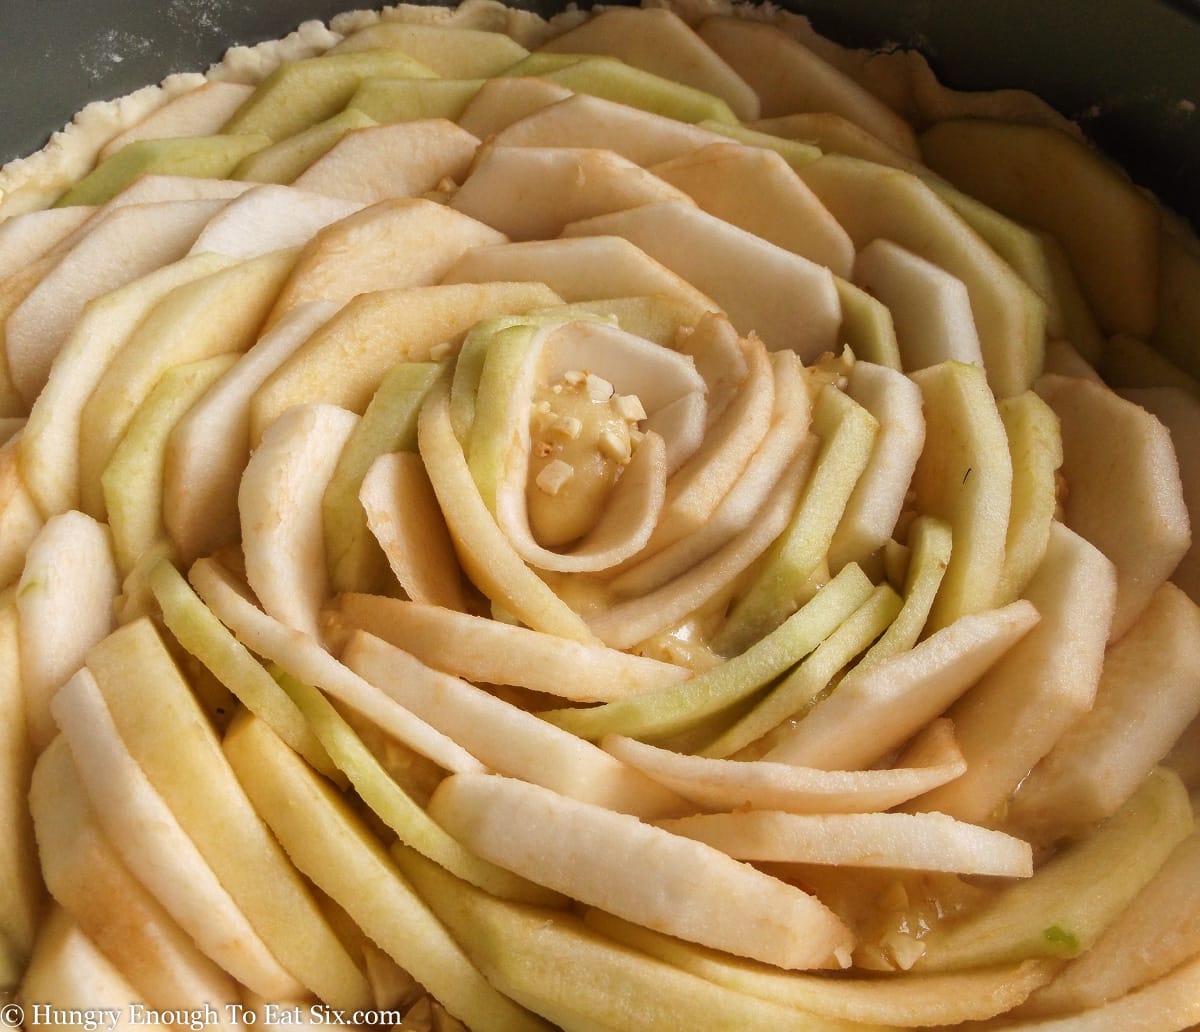 Raw tart with apple slices arranged in a spiral